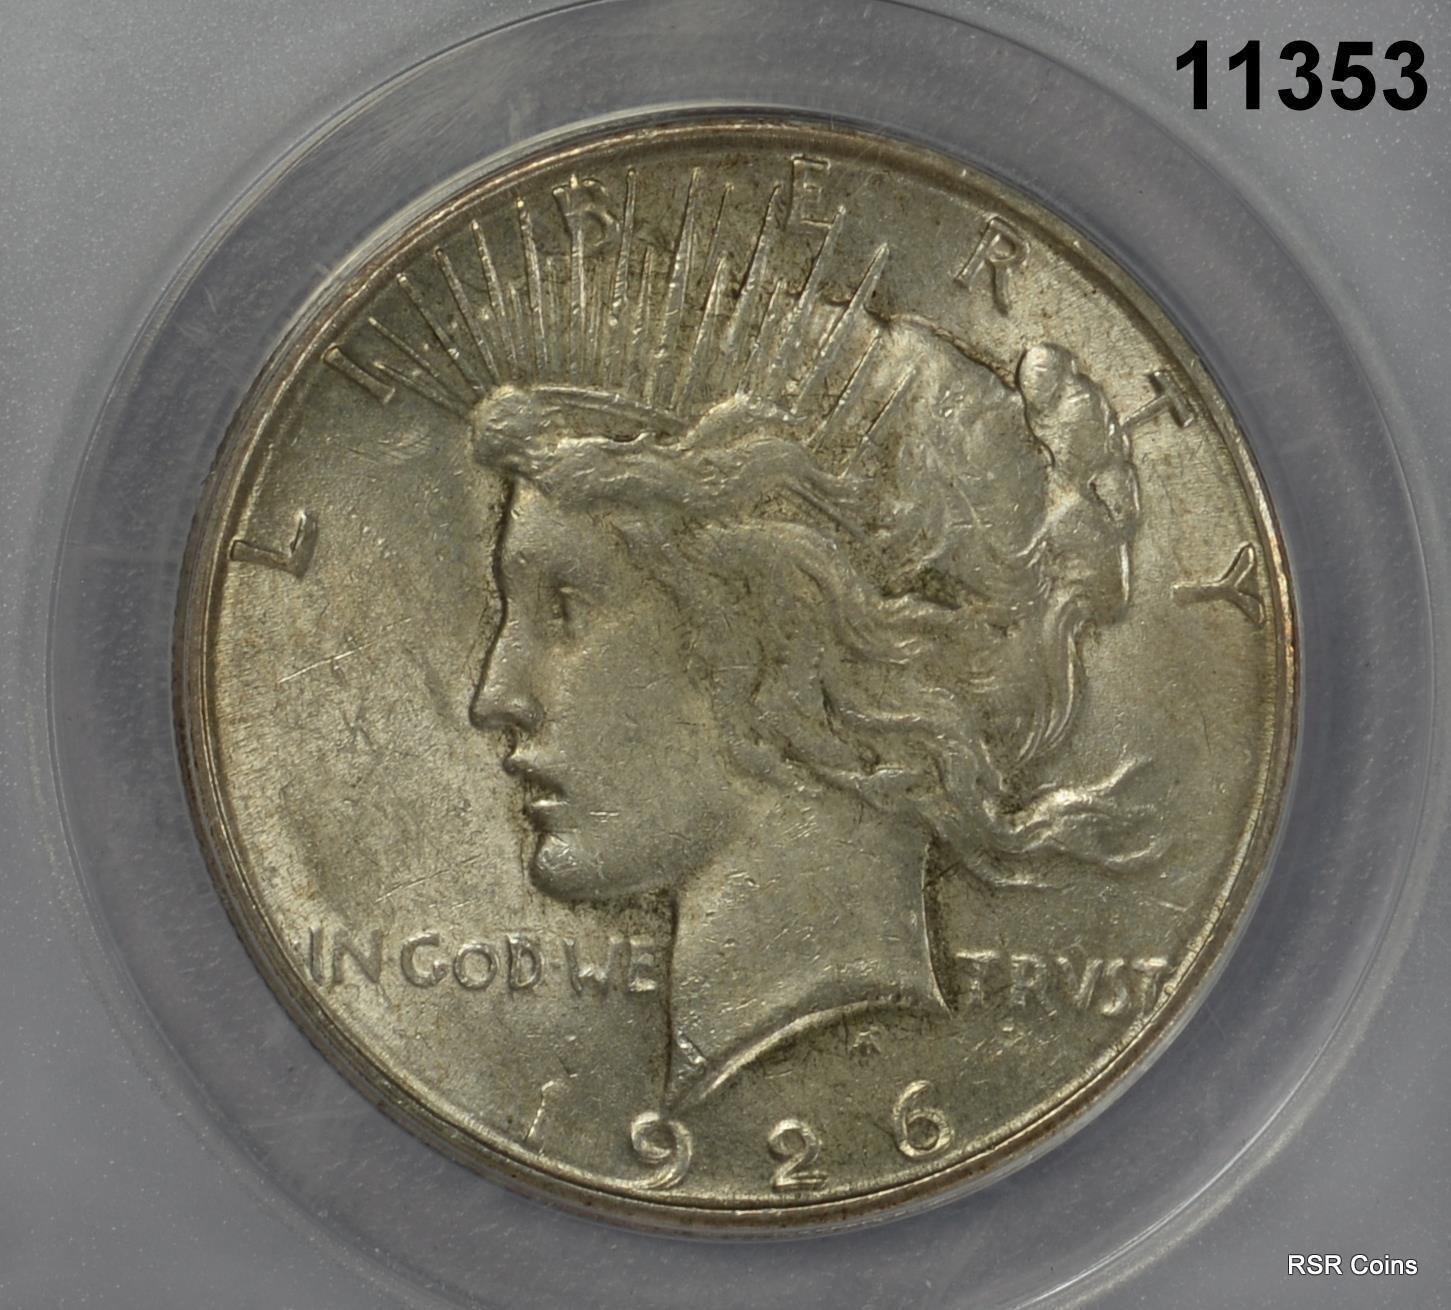 1926 S PEACE SILVER DOLLAR ANACS CERTIFIED AU55 #11353